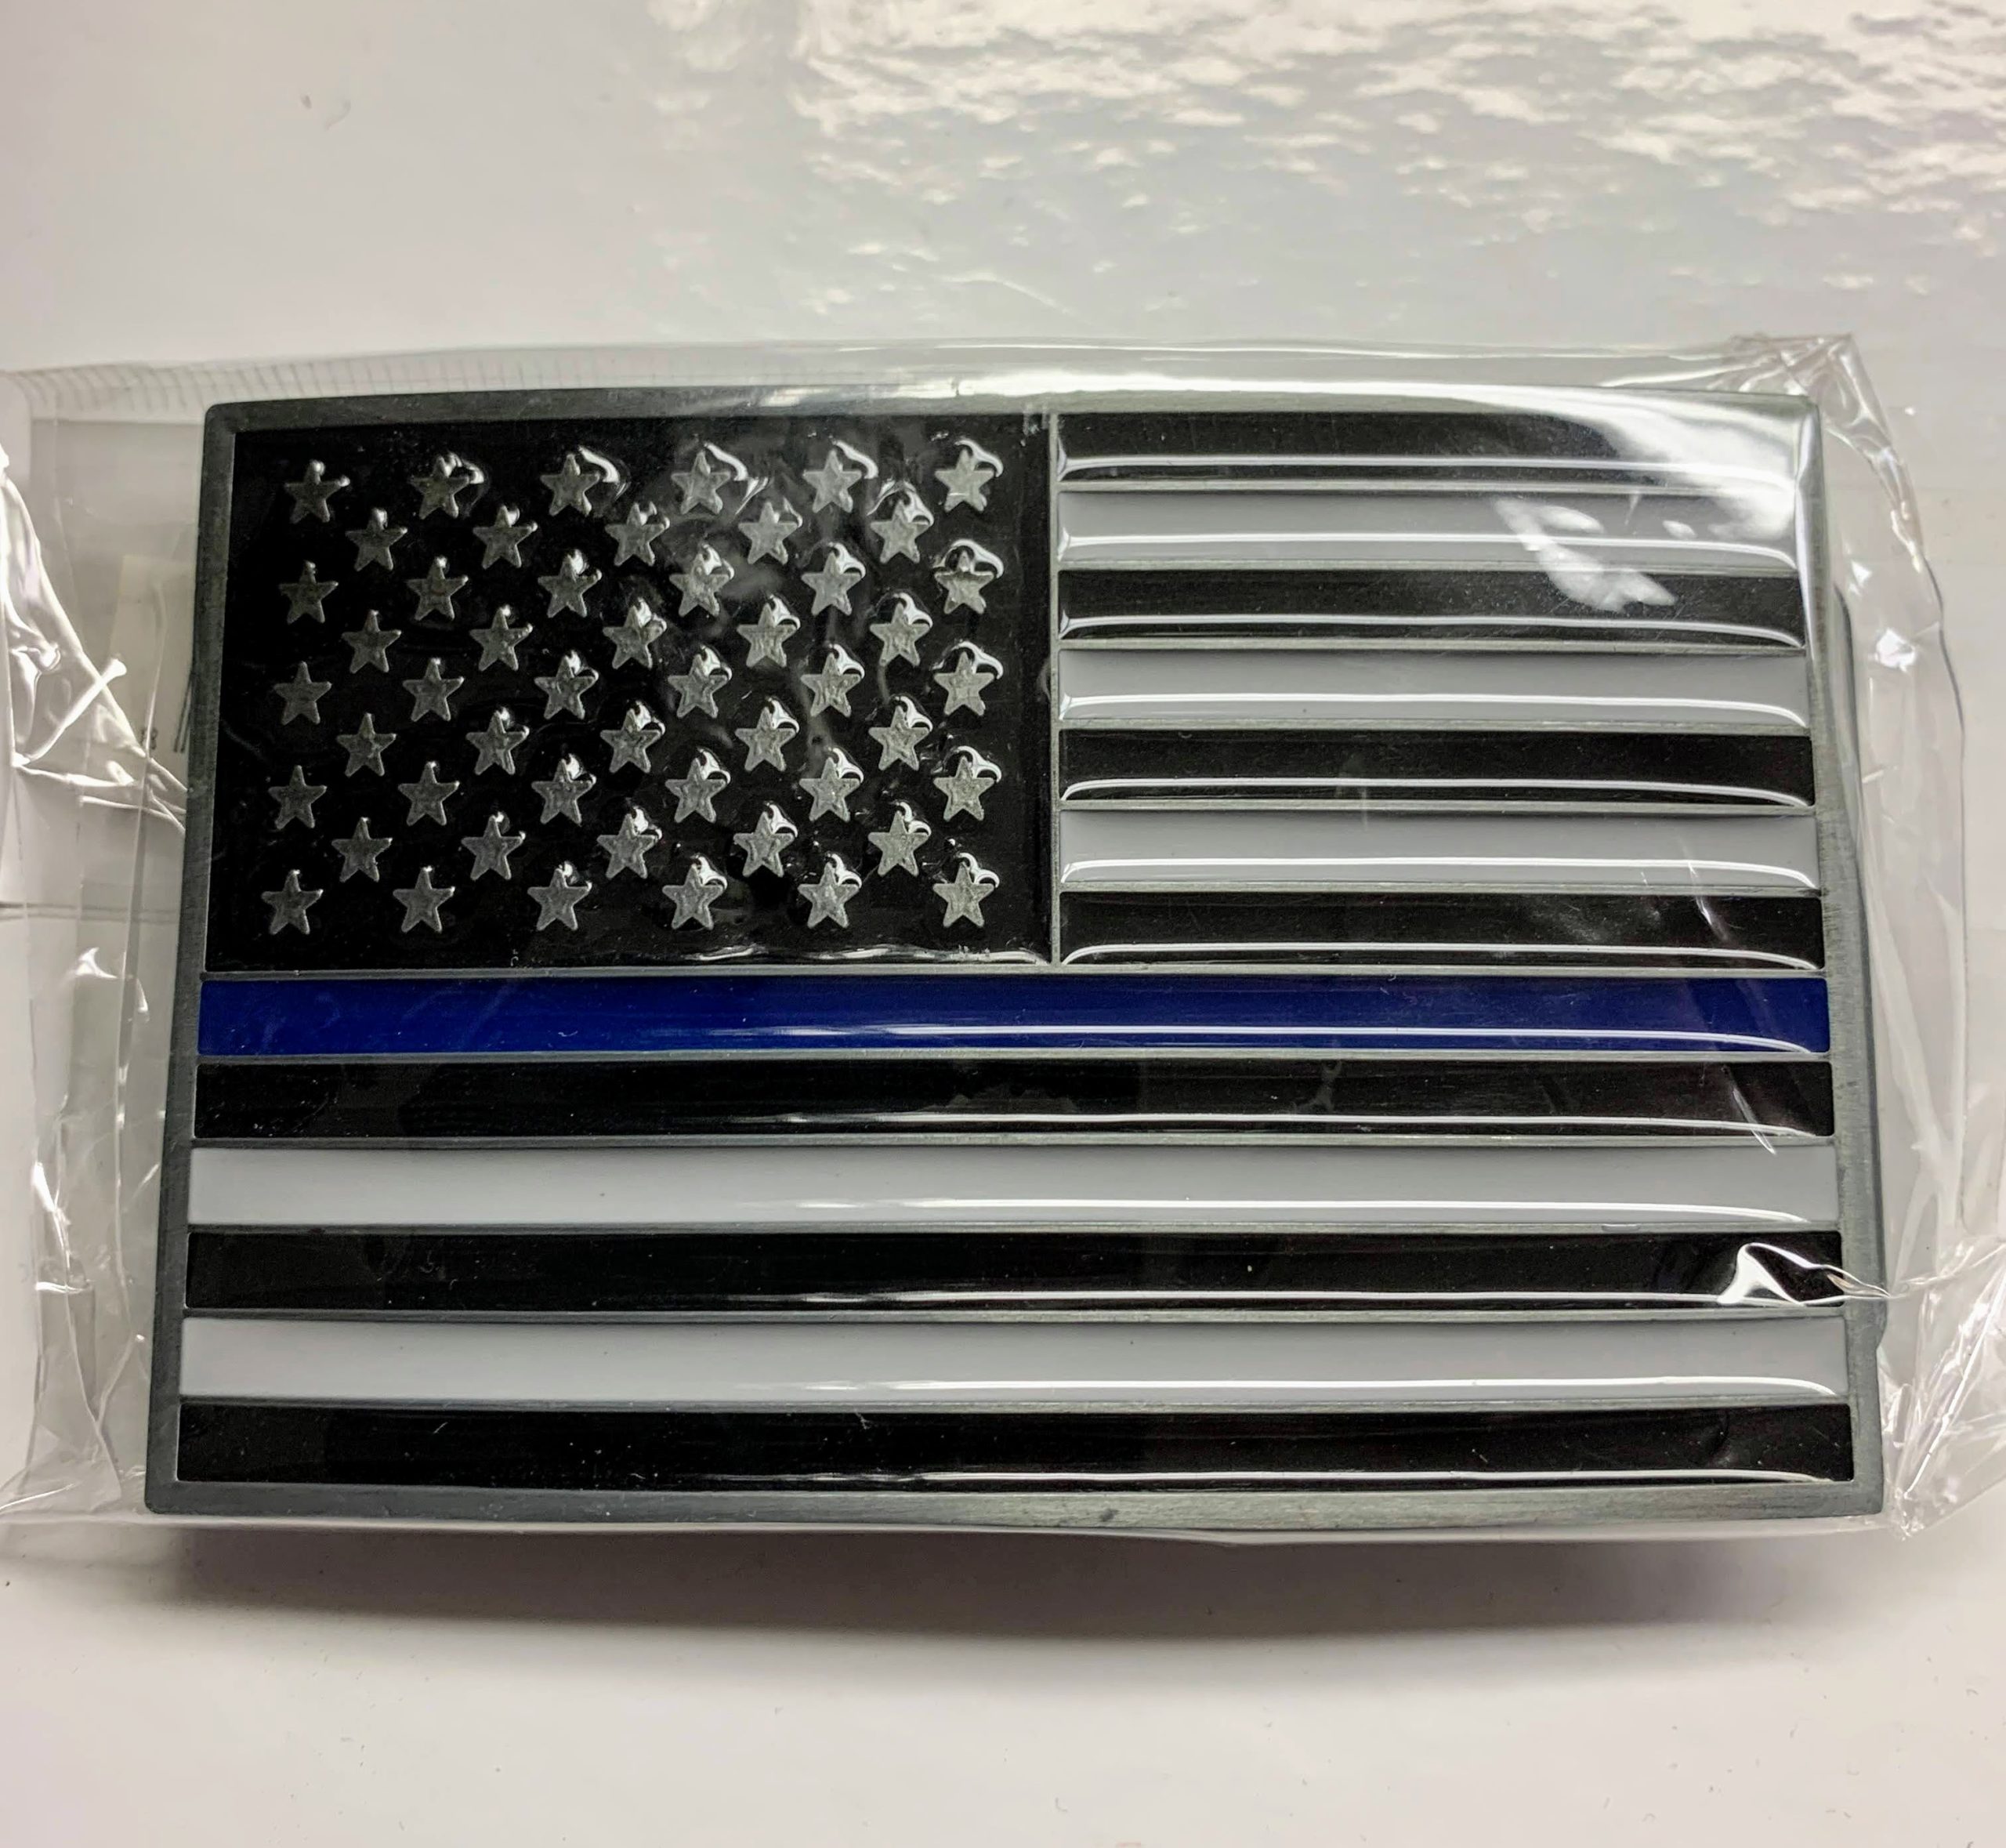 Support Police Cops Thin Blue Line Lives Matter Cotton Web Belt & Buckle Rothco 